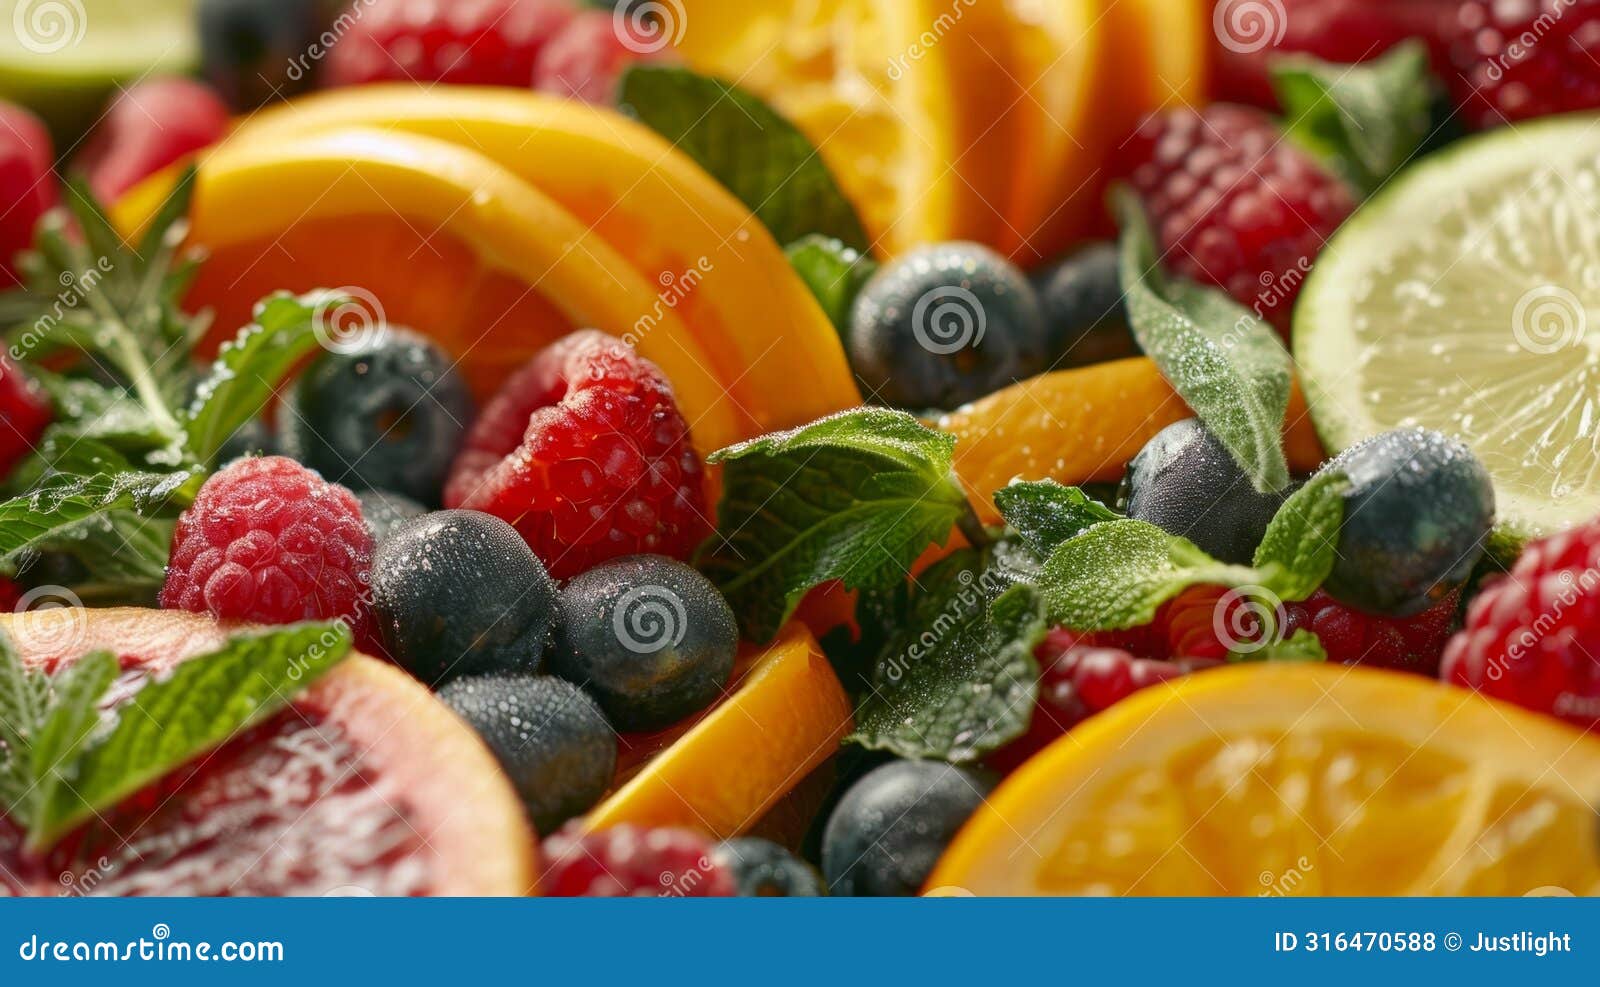 a colorful spread of fresh fruits and herbs used to infuse nonalcoholic beverages in a baking and mixology class